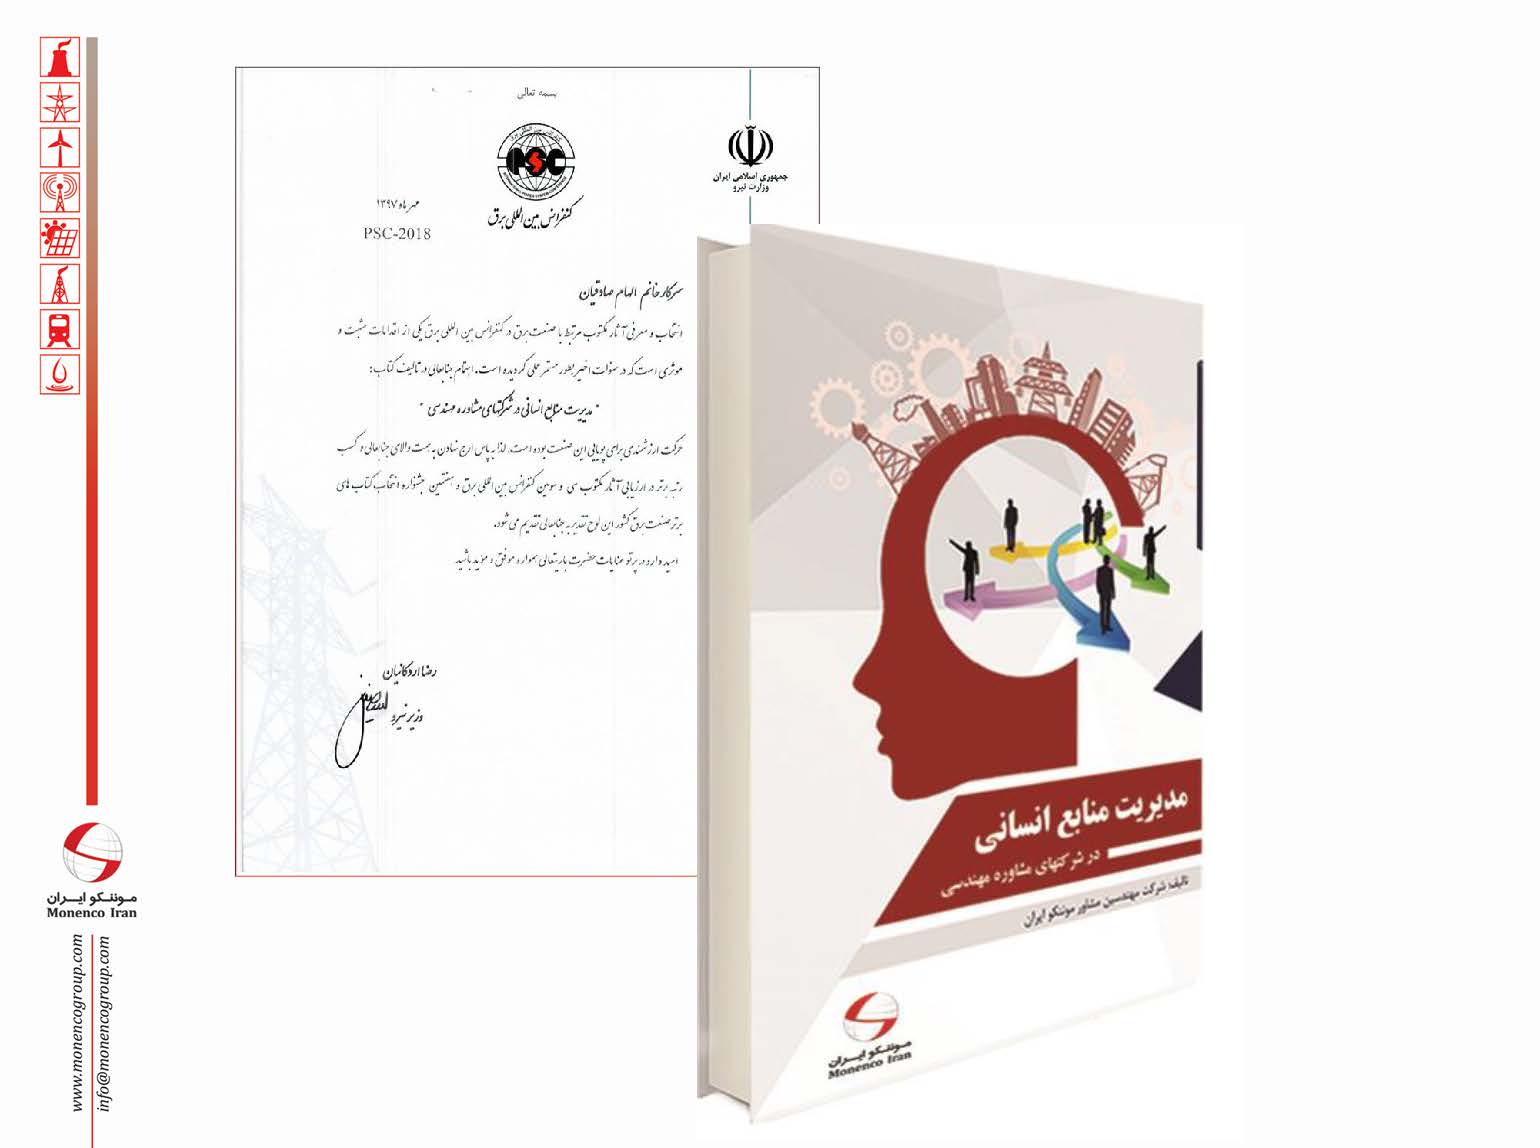 &quotHuman Resources Management in Engineering Consultancy Companies" Book published by Monenco Iran Consulting Engineers